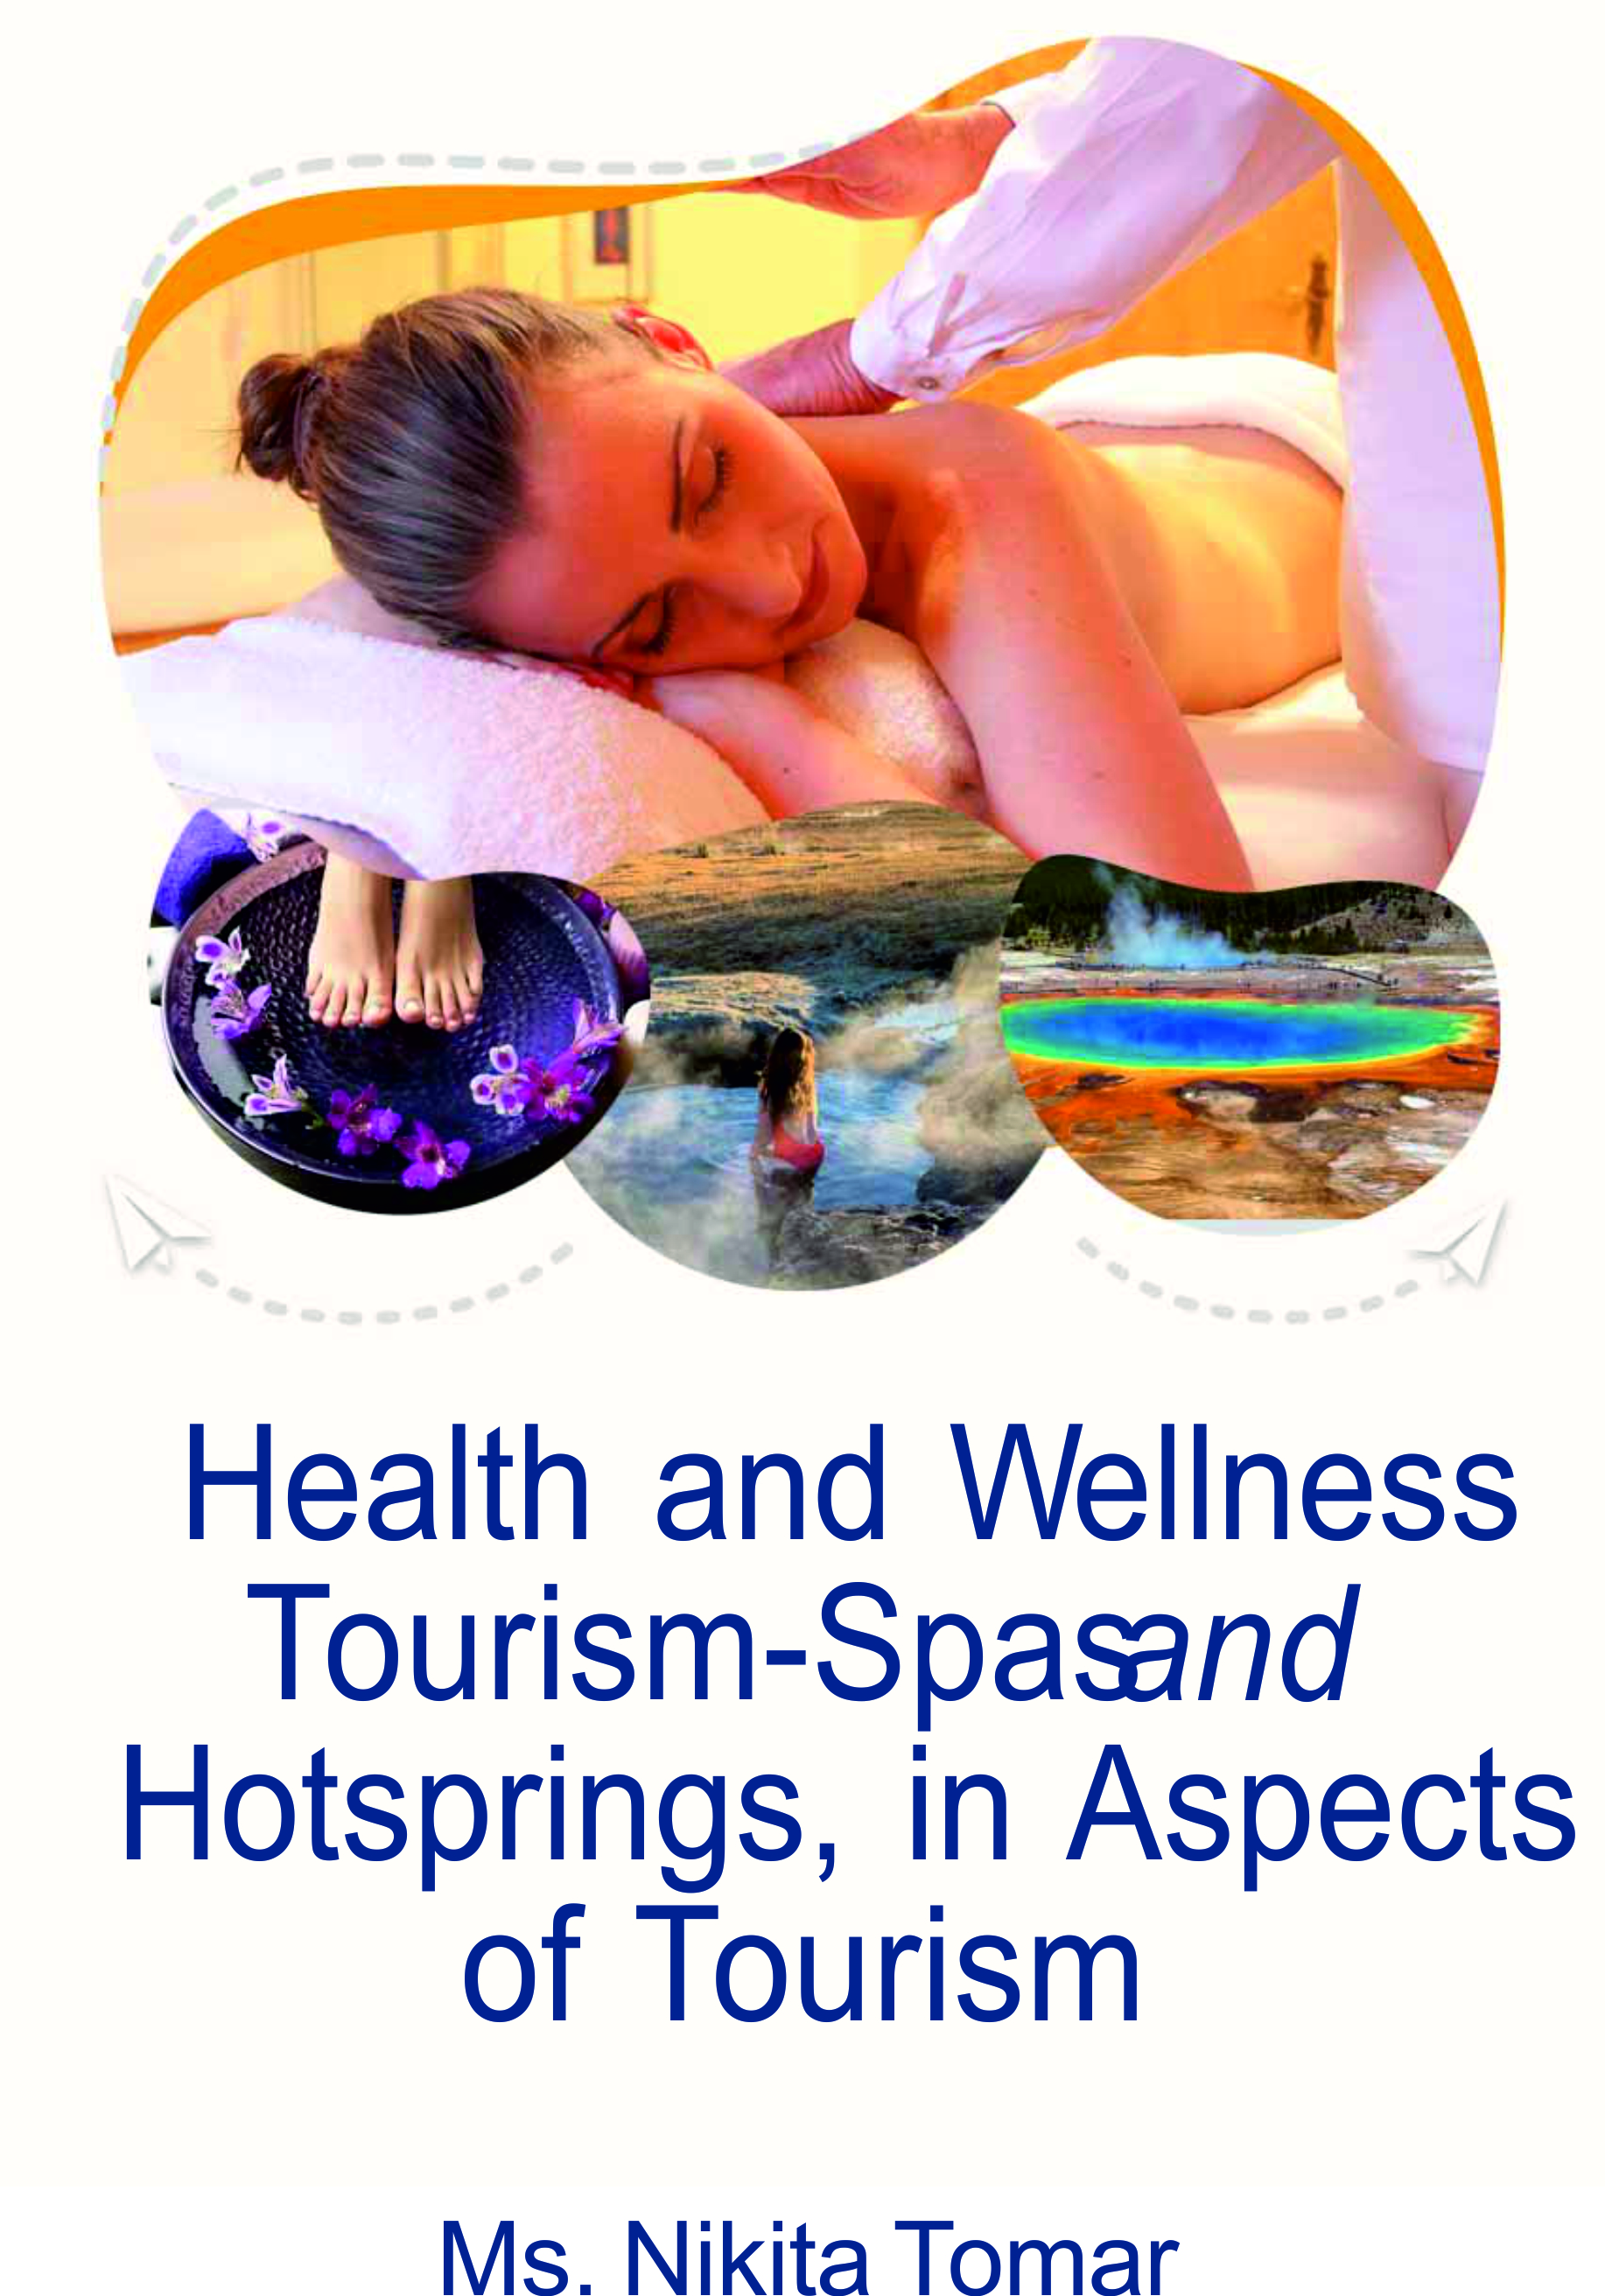 Health and Wellness Tourism: Spas and Hotsprings, in Aspects of Tourism